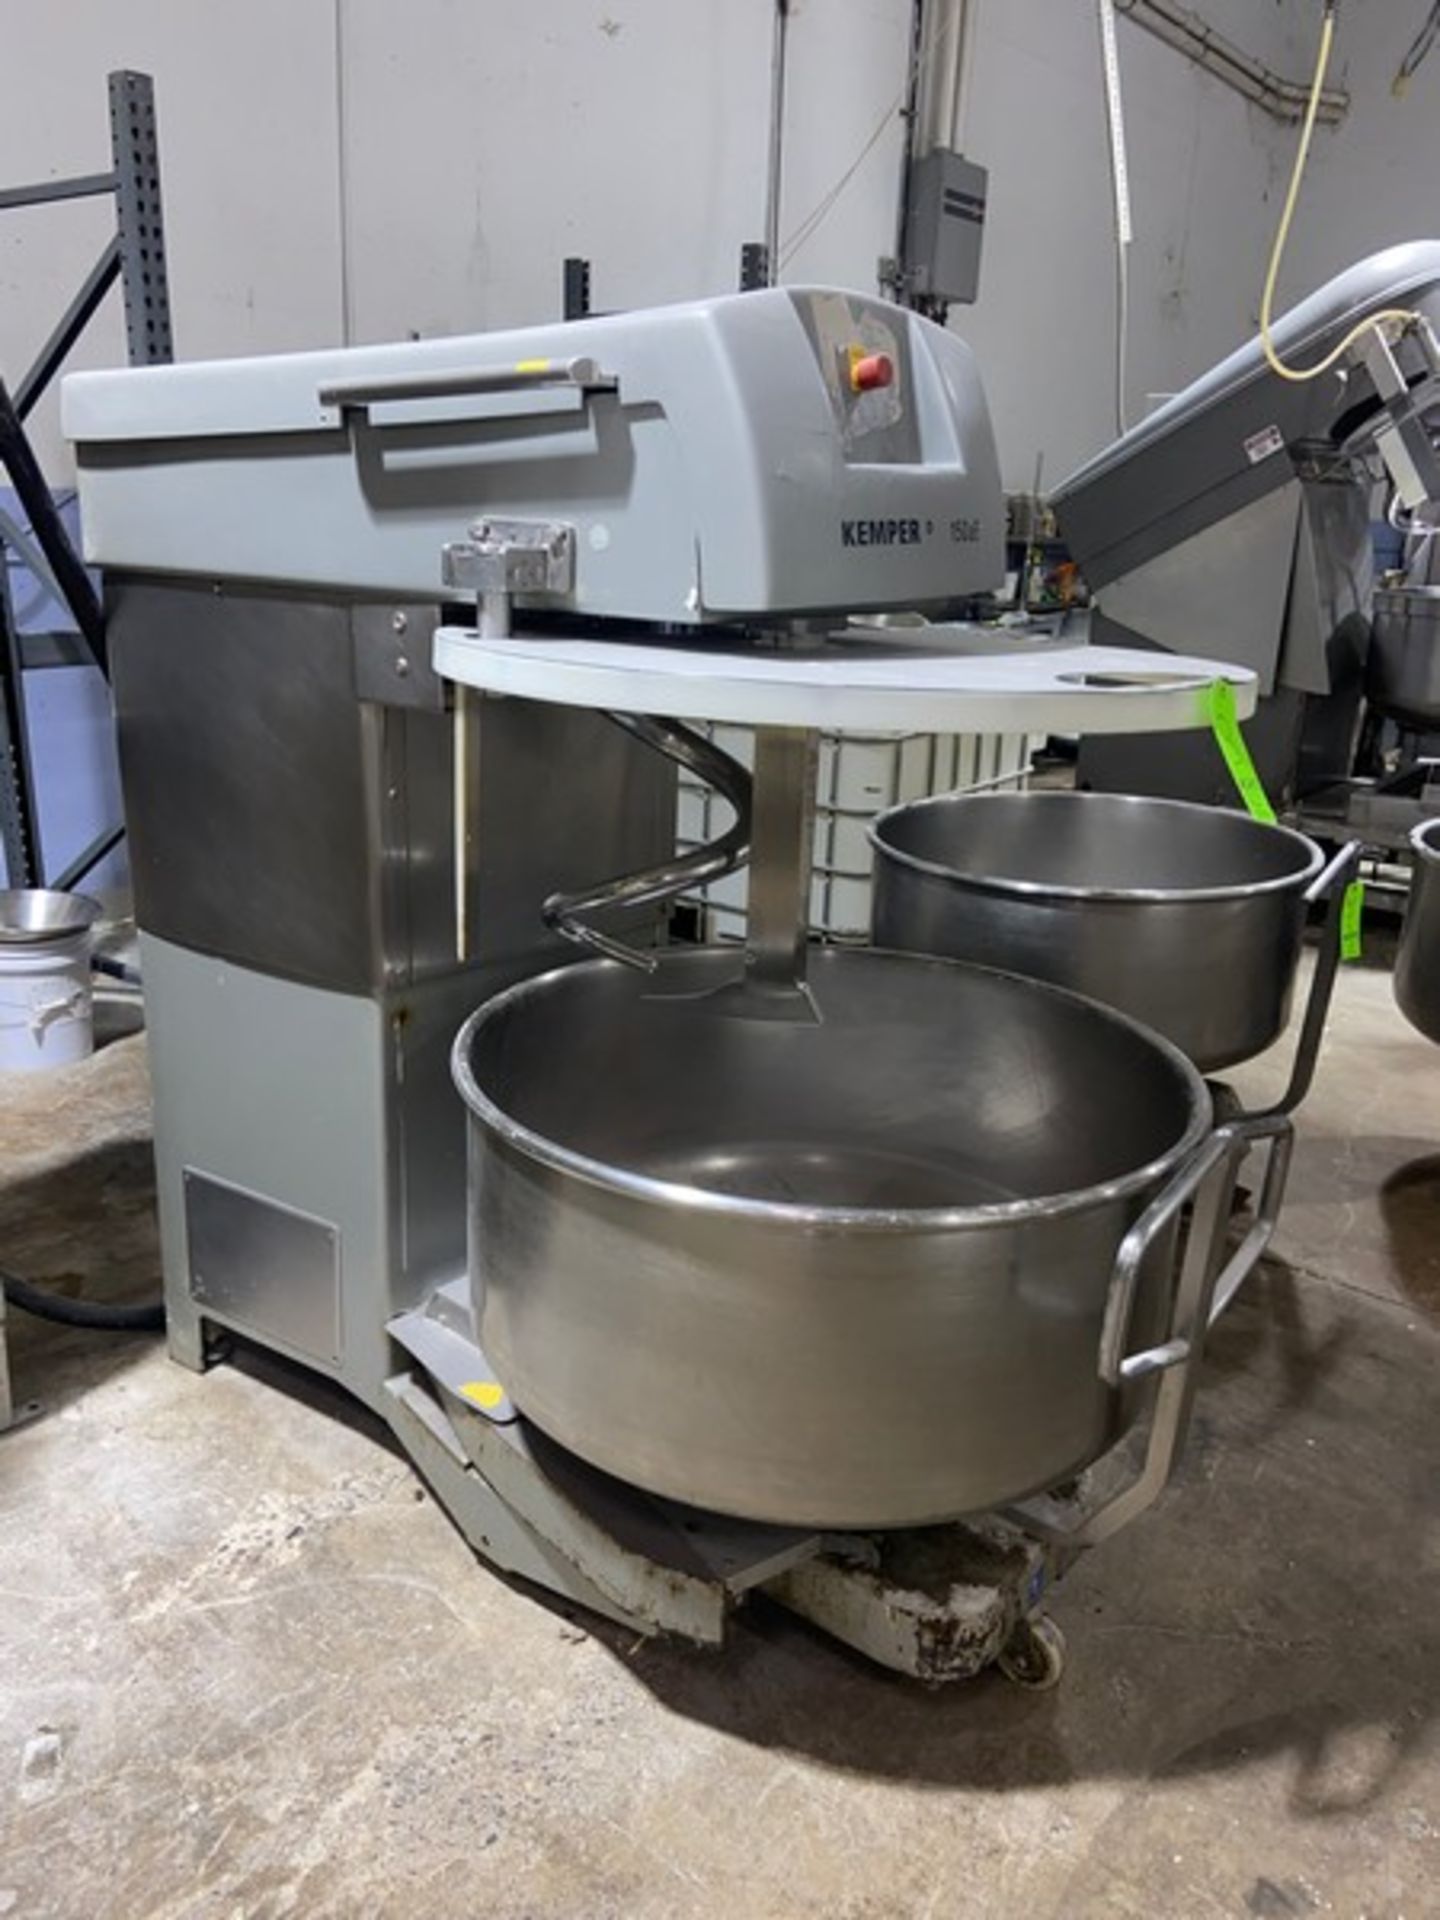 Kemper S/S Dough Mixer, Type: PRO 150 ASPS, Date-Code: J3A-98141/629027, 480 Volts, 3 Phase, with - Image 2 of 13